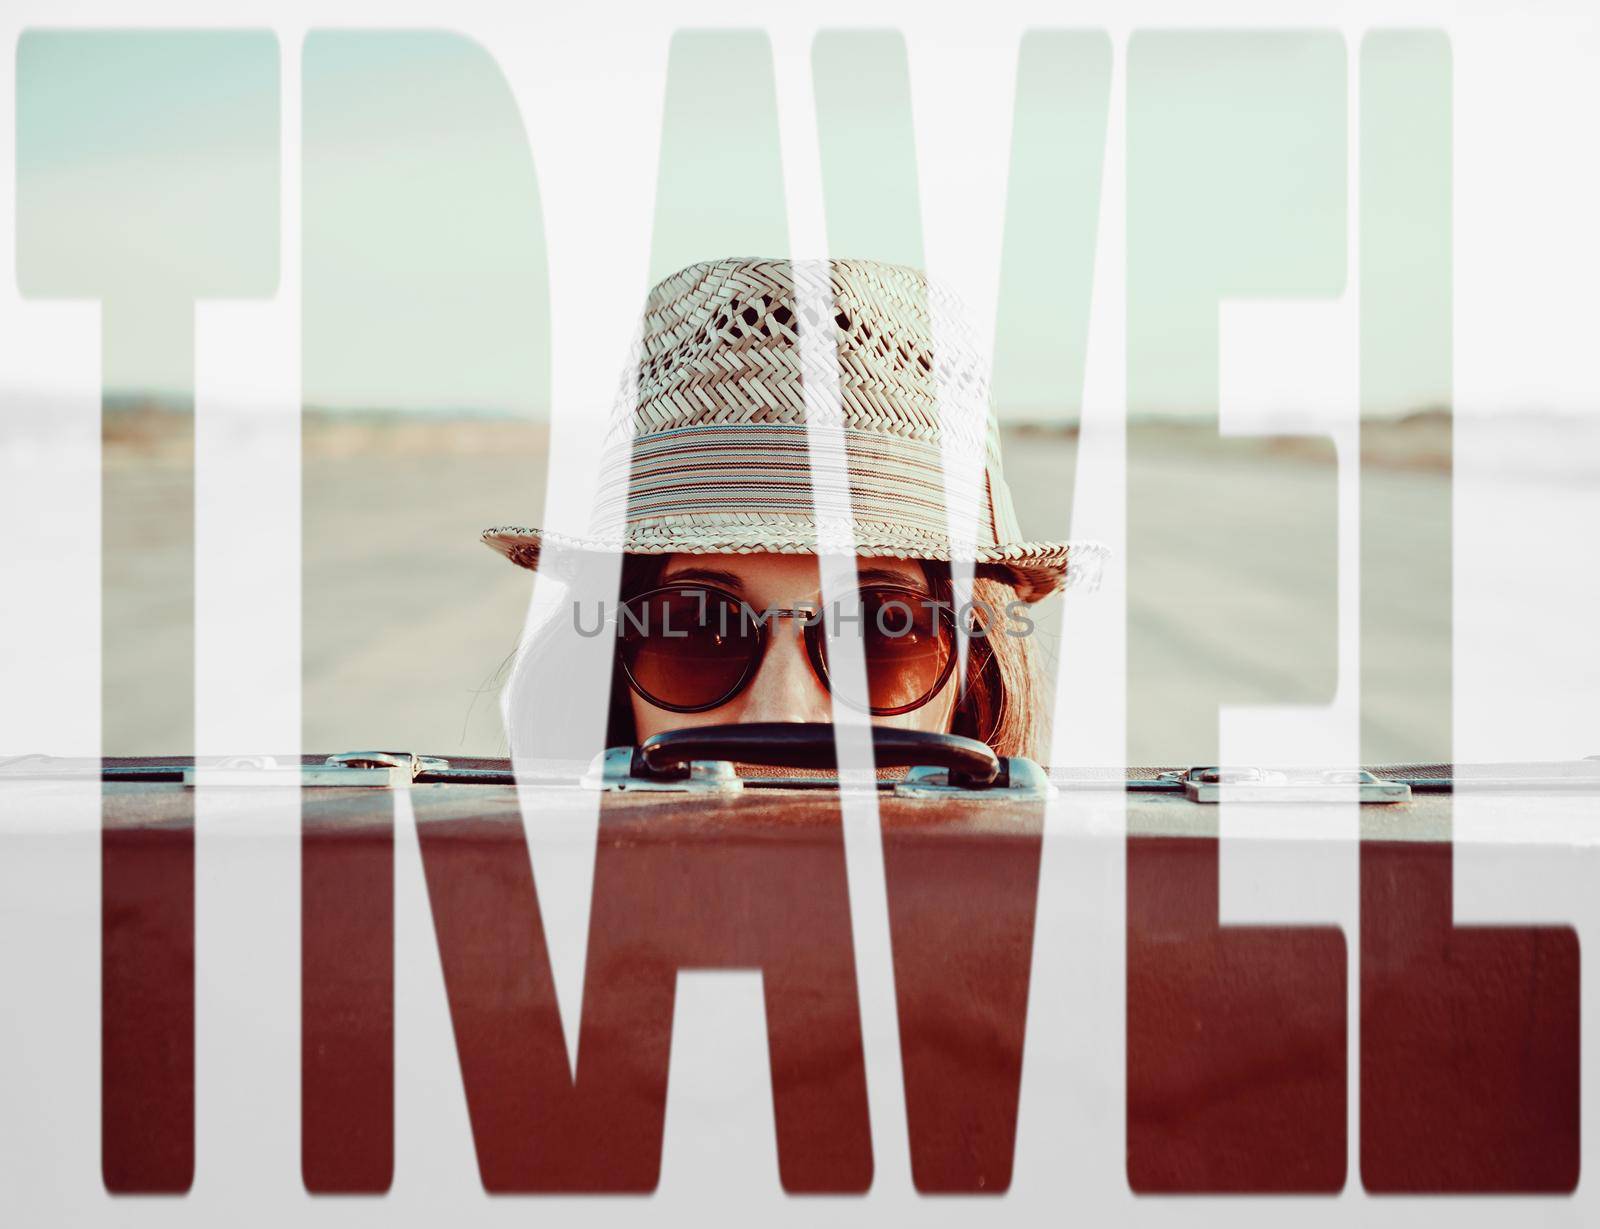 Double exposure word travel combined with image of traveler woman with suitcase. Concept of travel